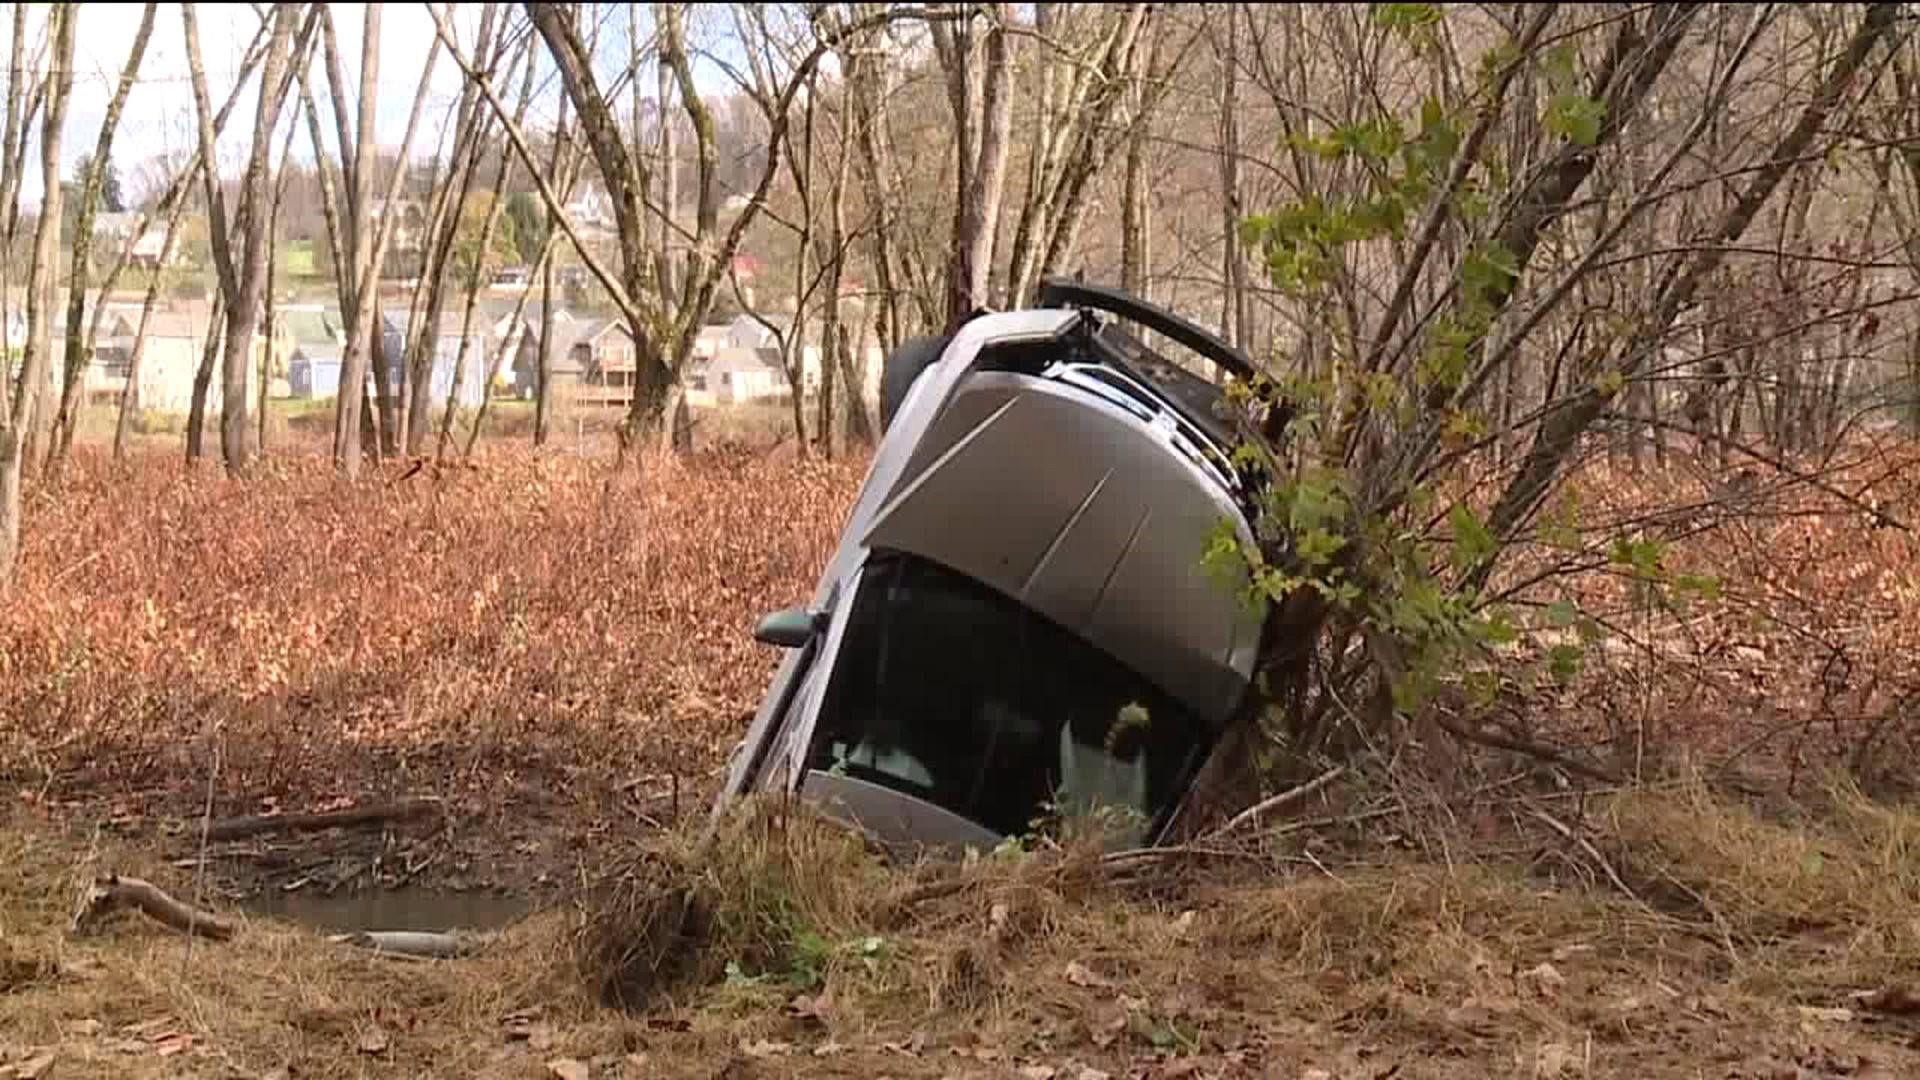 Vehicle Pulled from Creek after Crash